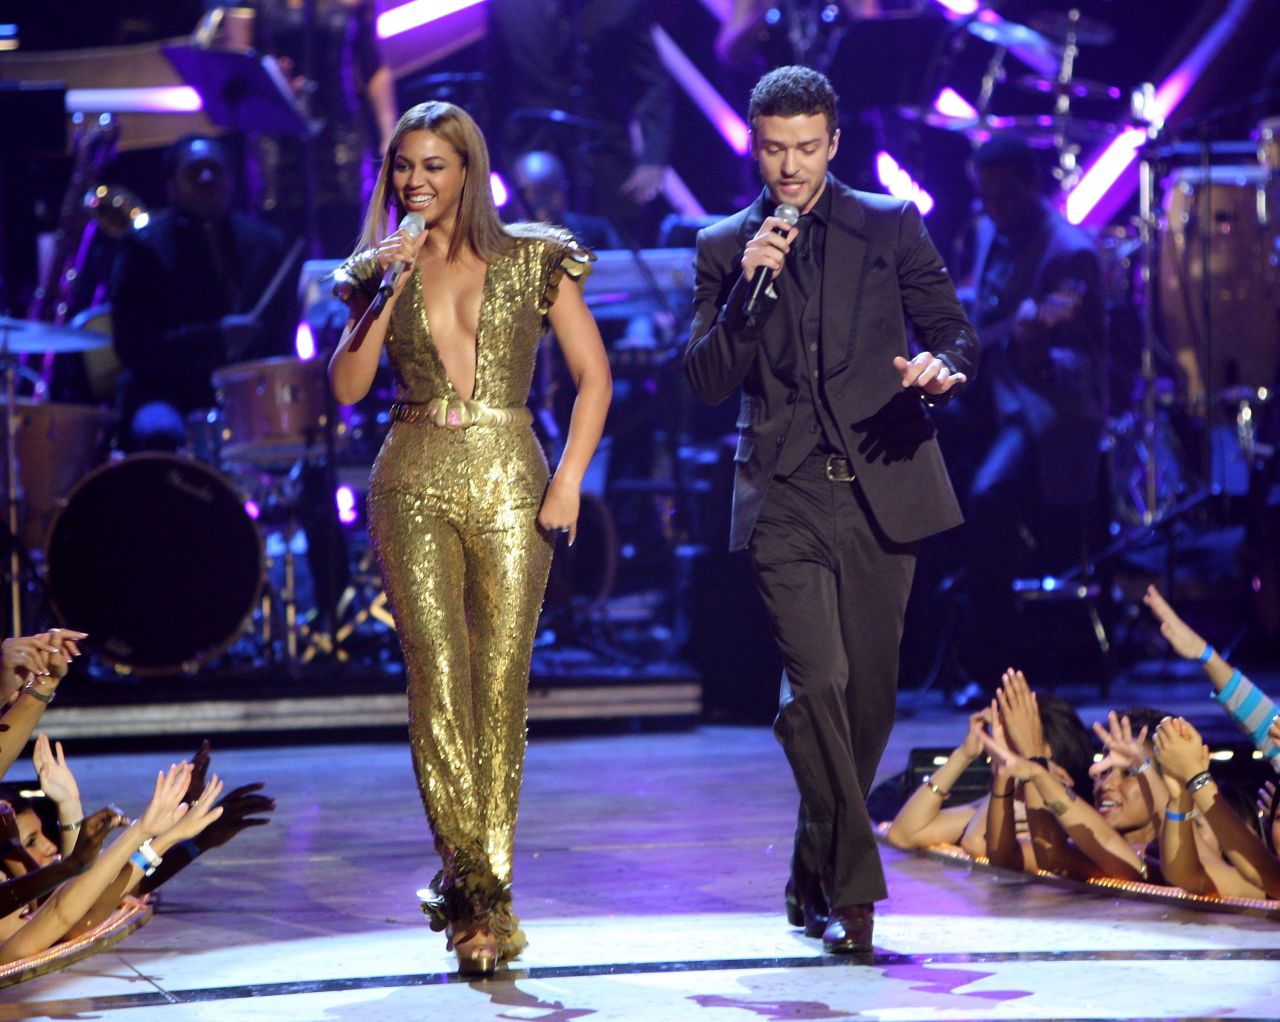 In 2008, Timberlake and Beyonce perform at Conde Nast Media Group's Fashion Rocks event in New York.